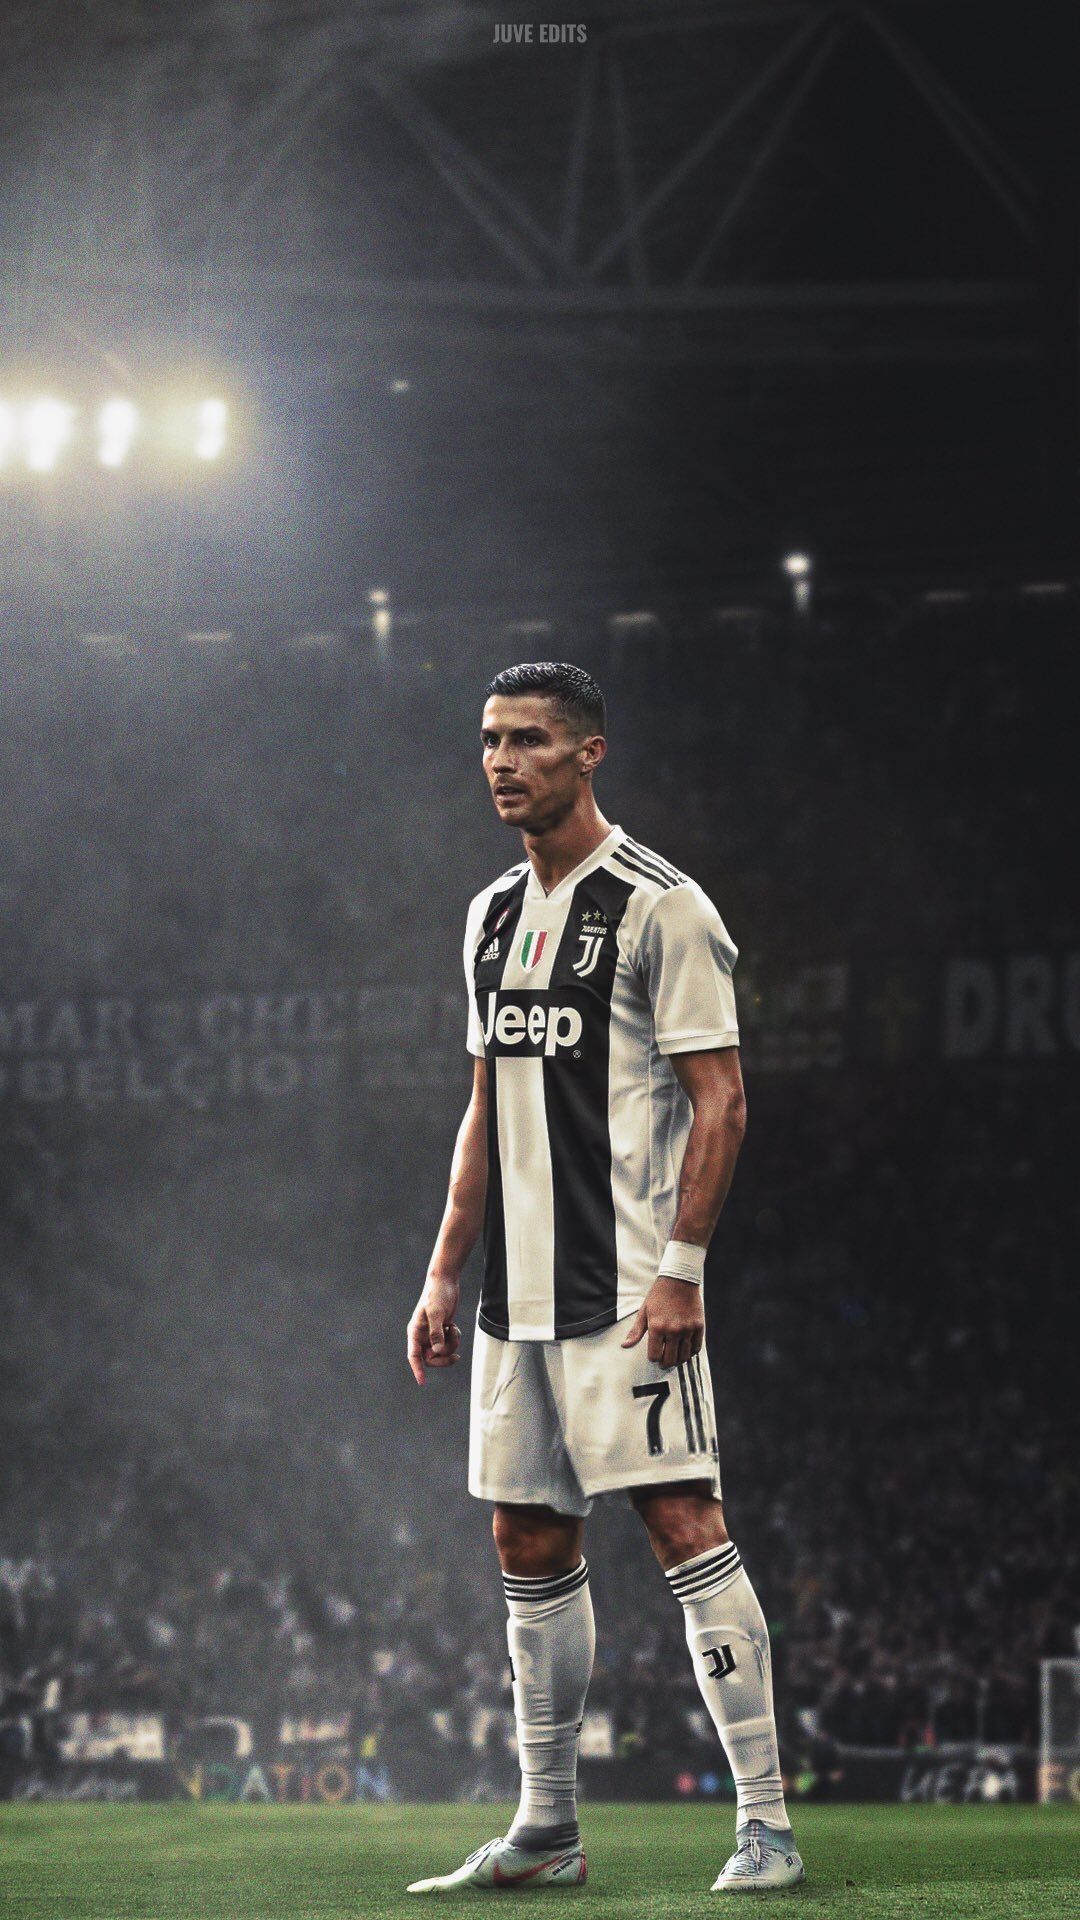 Cristiano Ronaldo Juventus iPhone Wallpaper with high-resolution 1080x1920 pixel. You can use this wallpaper for your iPhone 5, 6, 7, 8, X, XS, XR backgrounds, Mobile Screensaver, or iPad Lock Screen - Cristiano Ronaldo